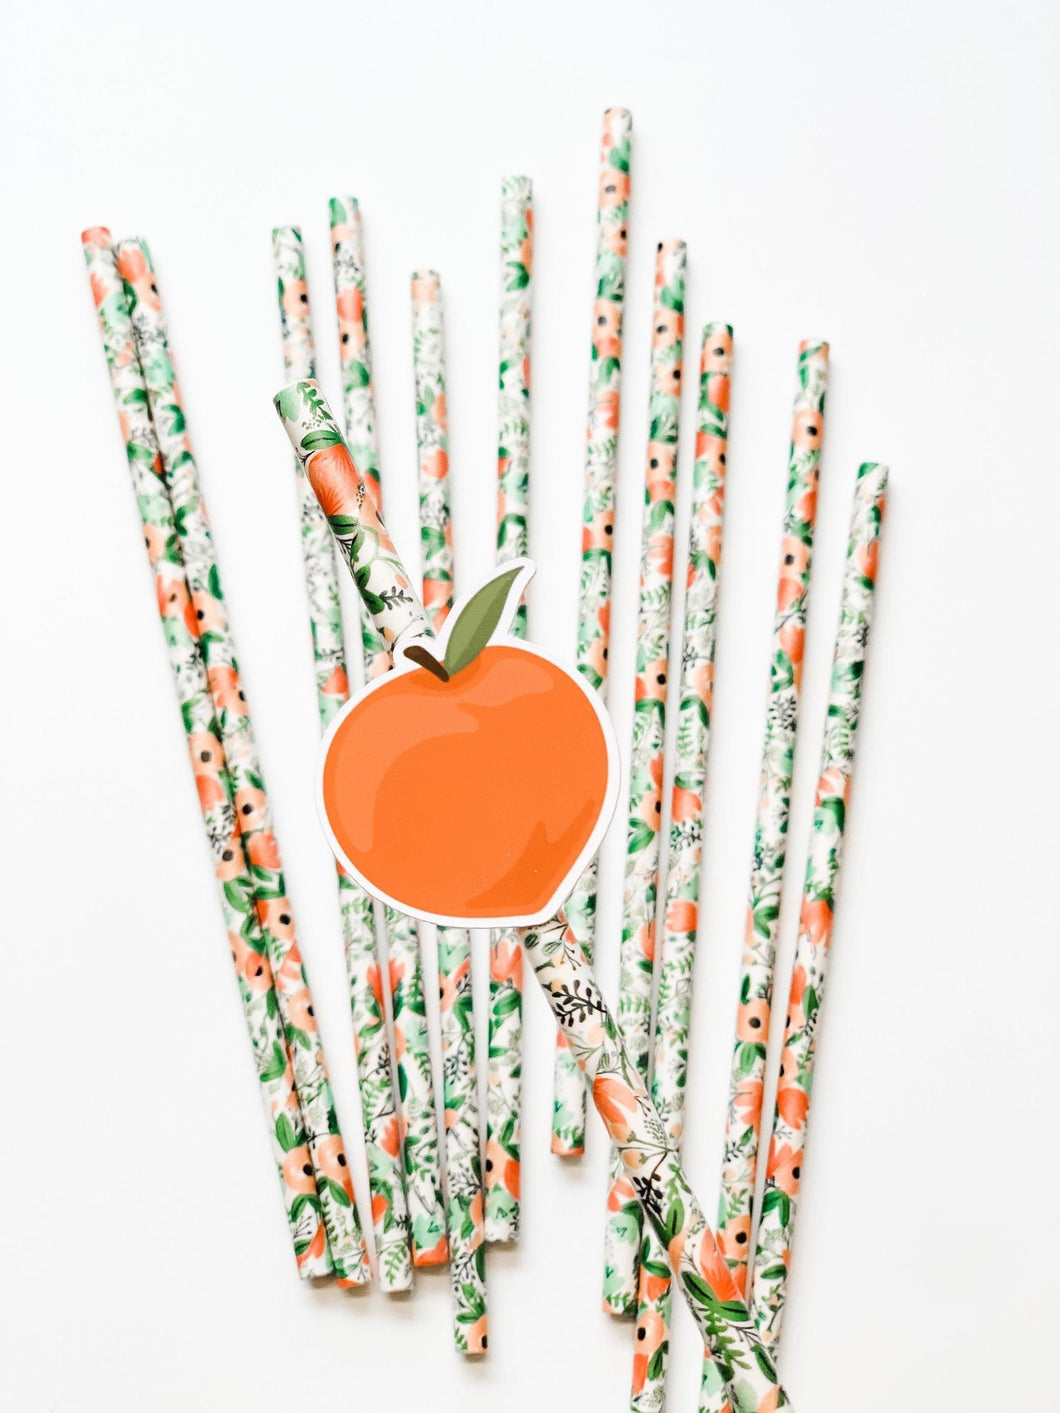 Floral Peach Straws - One Sweet Peach - Sweet As A Peach - Peach Birthday Party - Party Decorations - Drink Paper Straws - Peach Party